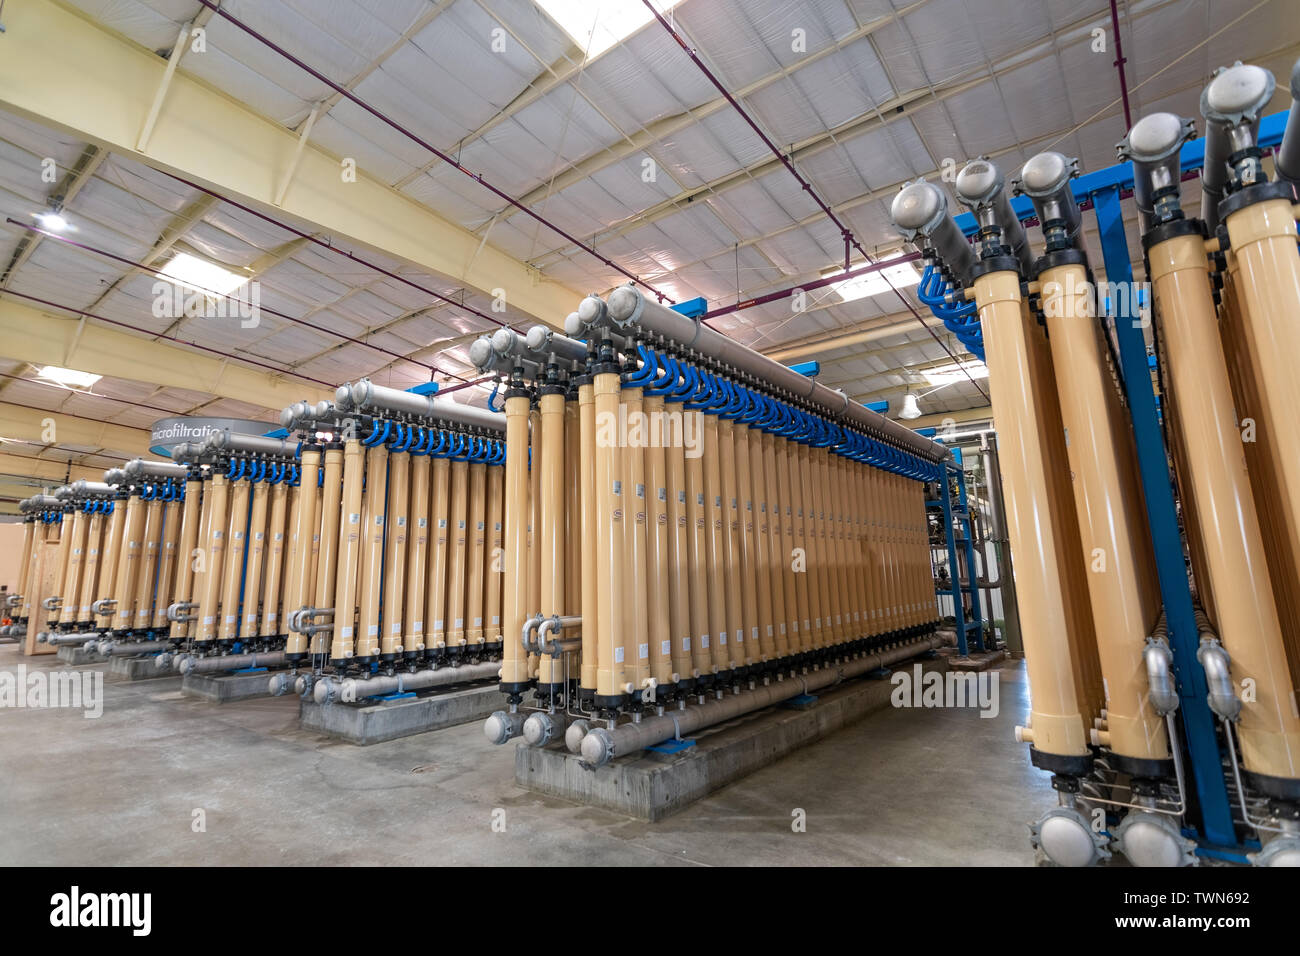 June 20, 2019 San Jose / CA / USA - Micro filtration system at Silicon Valley Advanced Water Purification Center located in South San Francisco bay ar Stock Photo